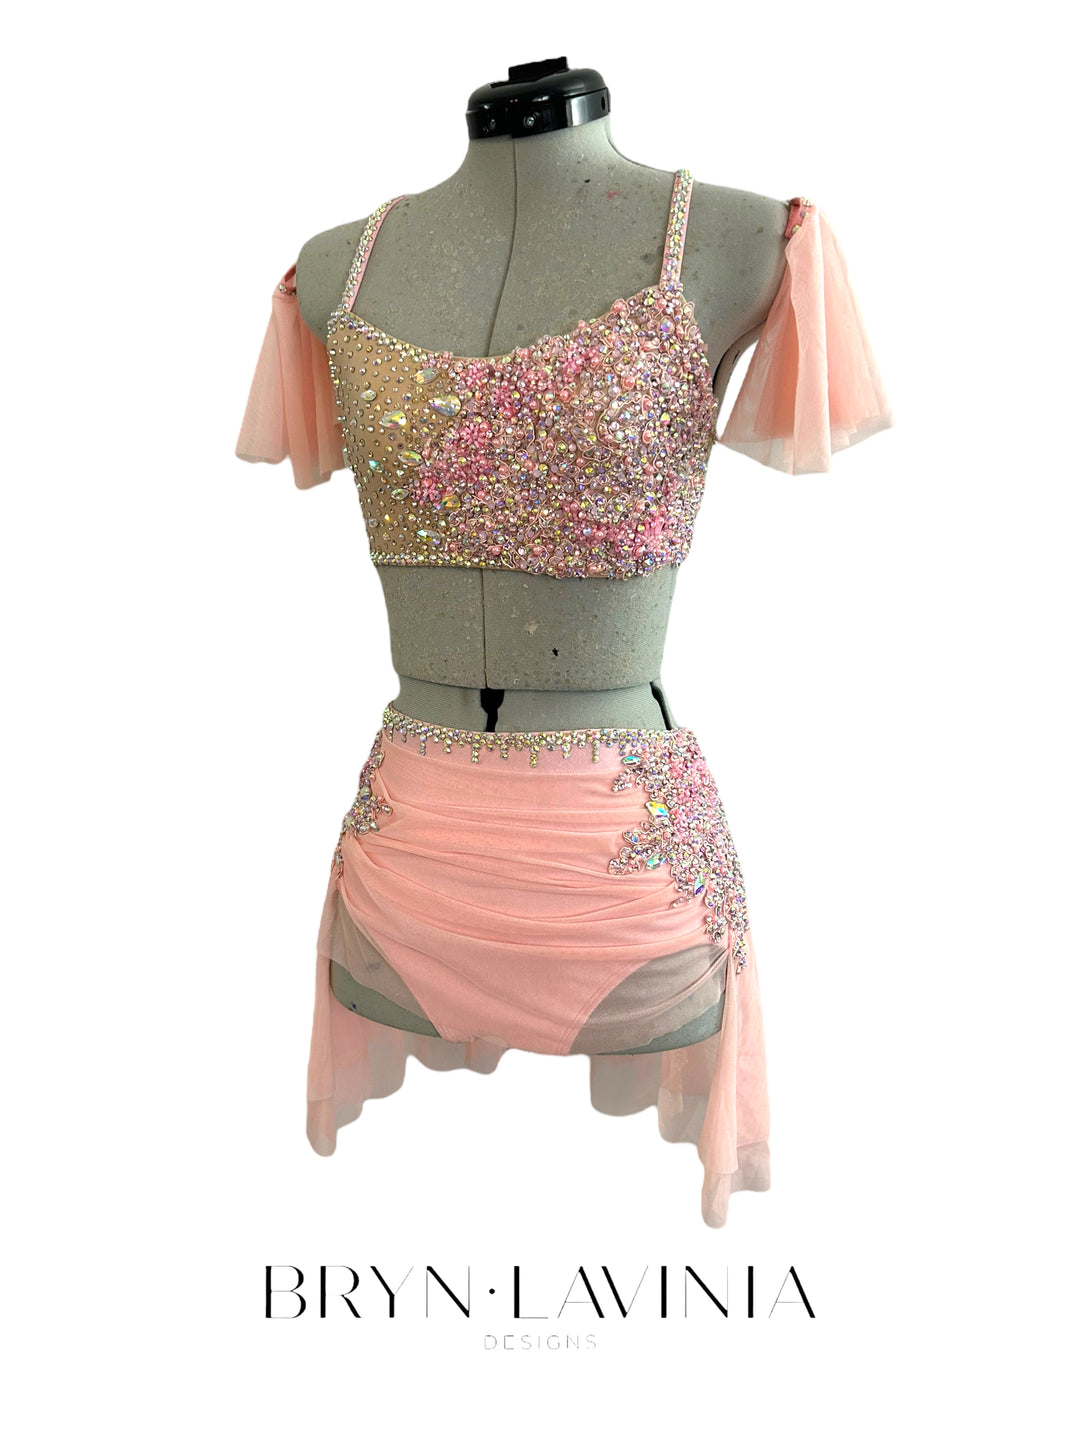 NEW AXS Light Pink/Nude ready to ship costume